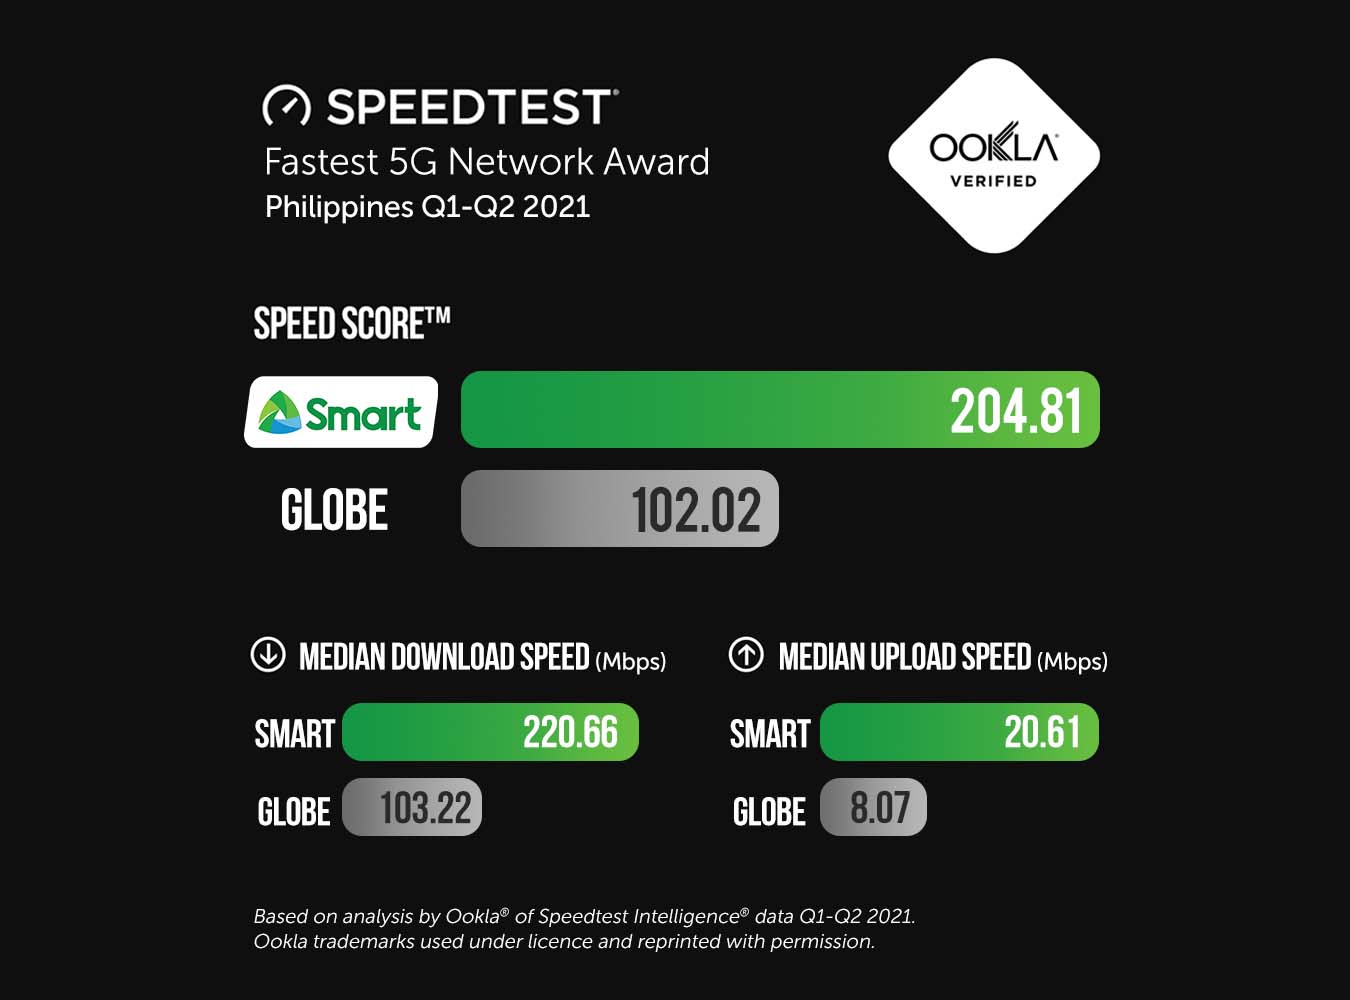 Smart reasserts dominance  as the Philippines’ Fastest 5G Mobile Network